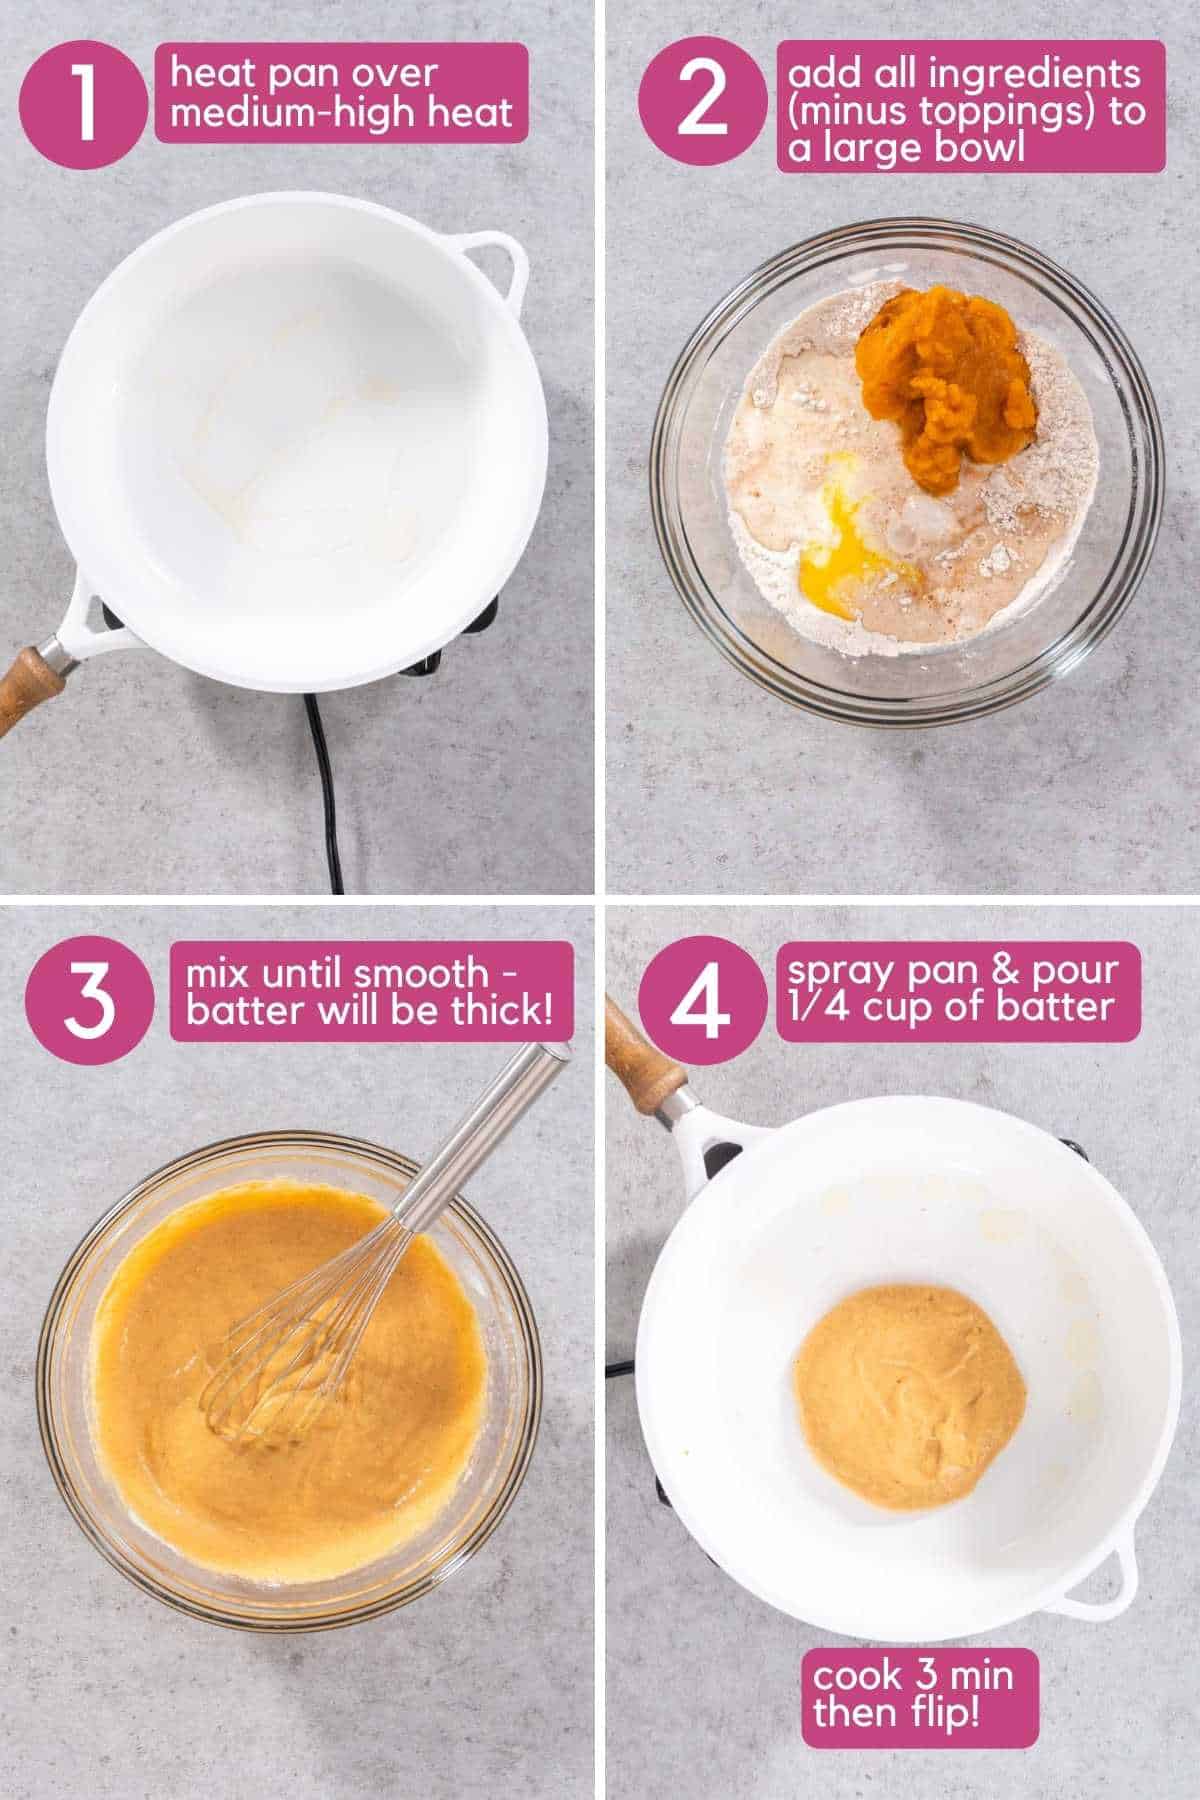 Bisquick Pumpkin Pancakes how to make steps 1-4.